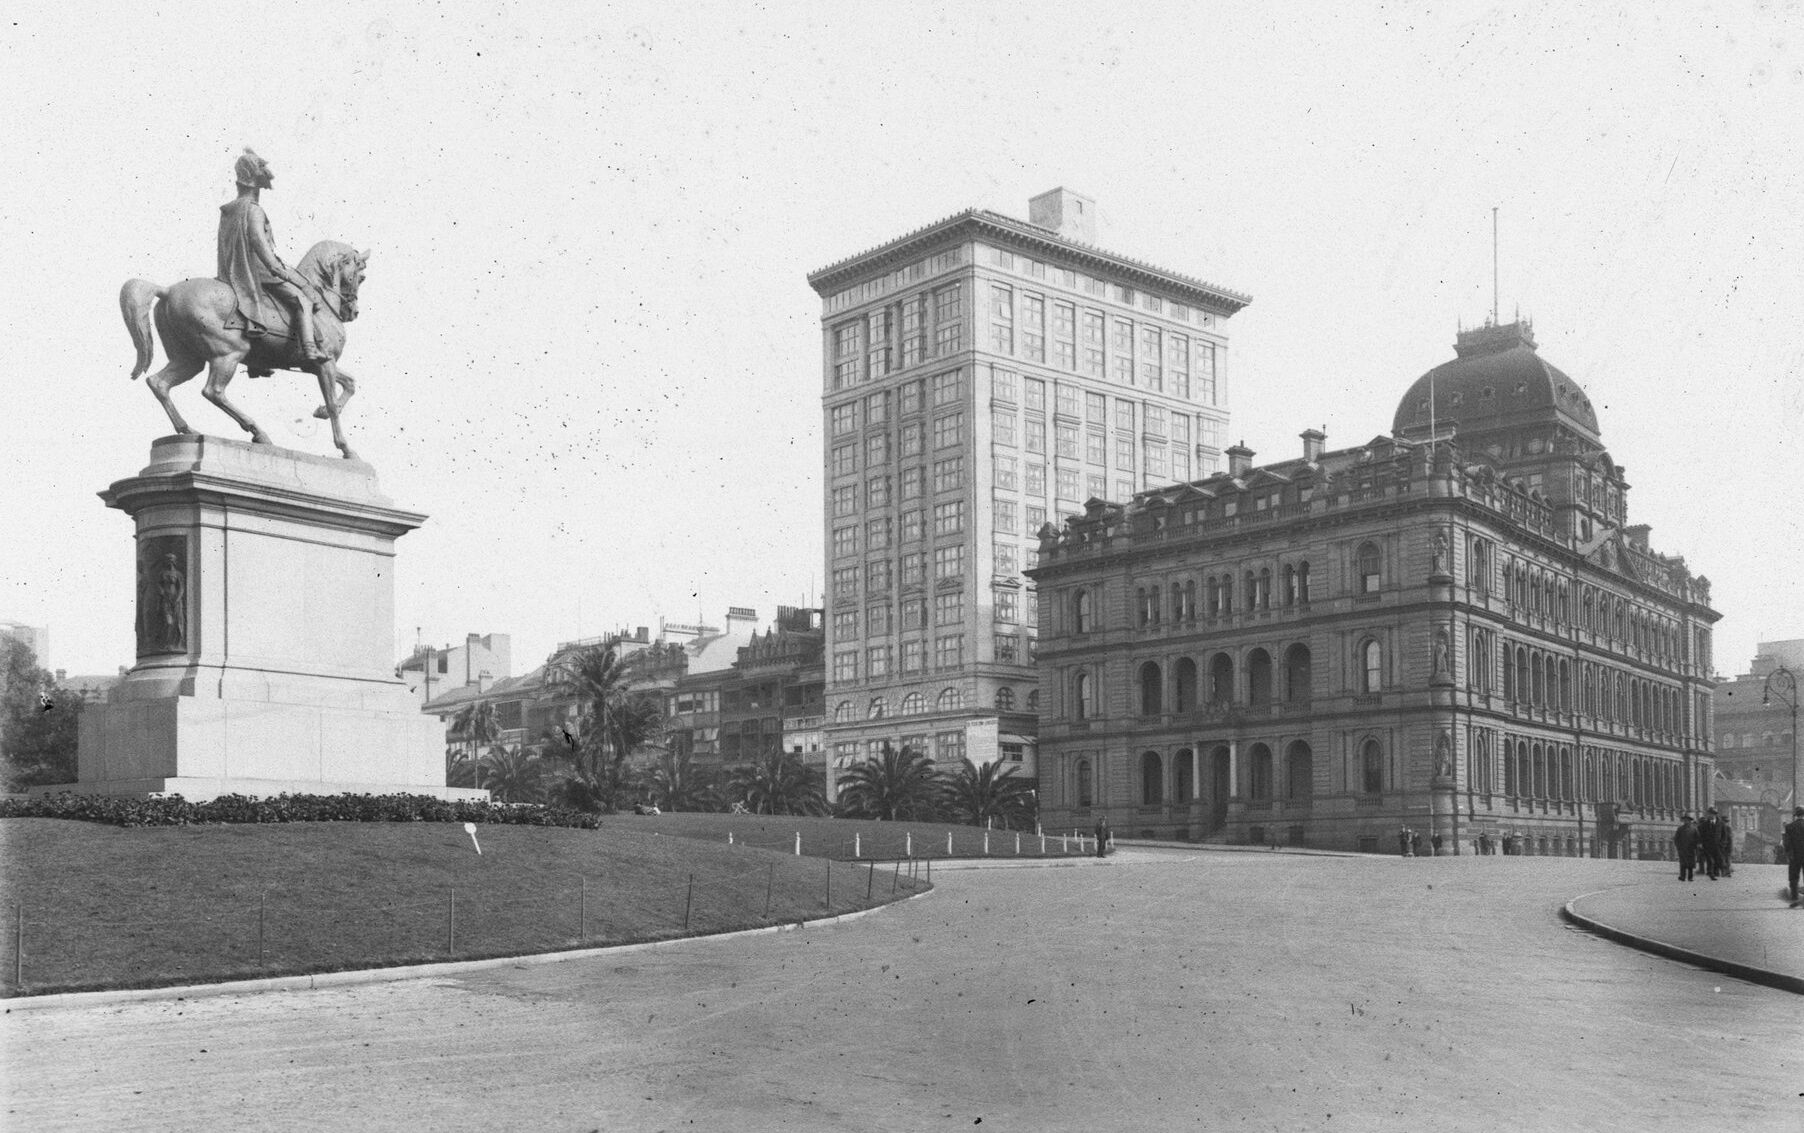 Equestrian Statue of the King, Astor Flats and Chief Secretary’s Building